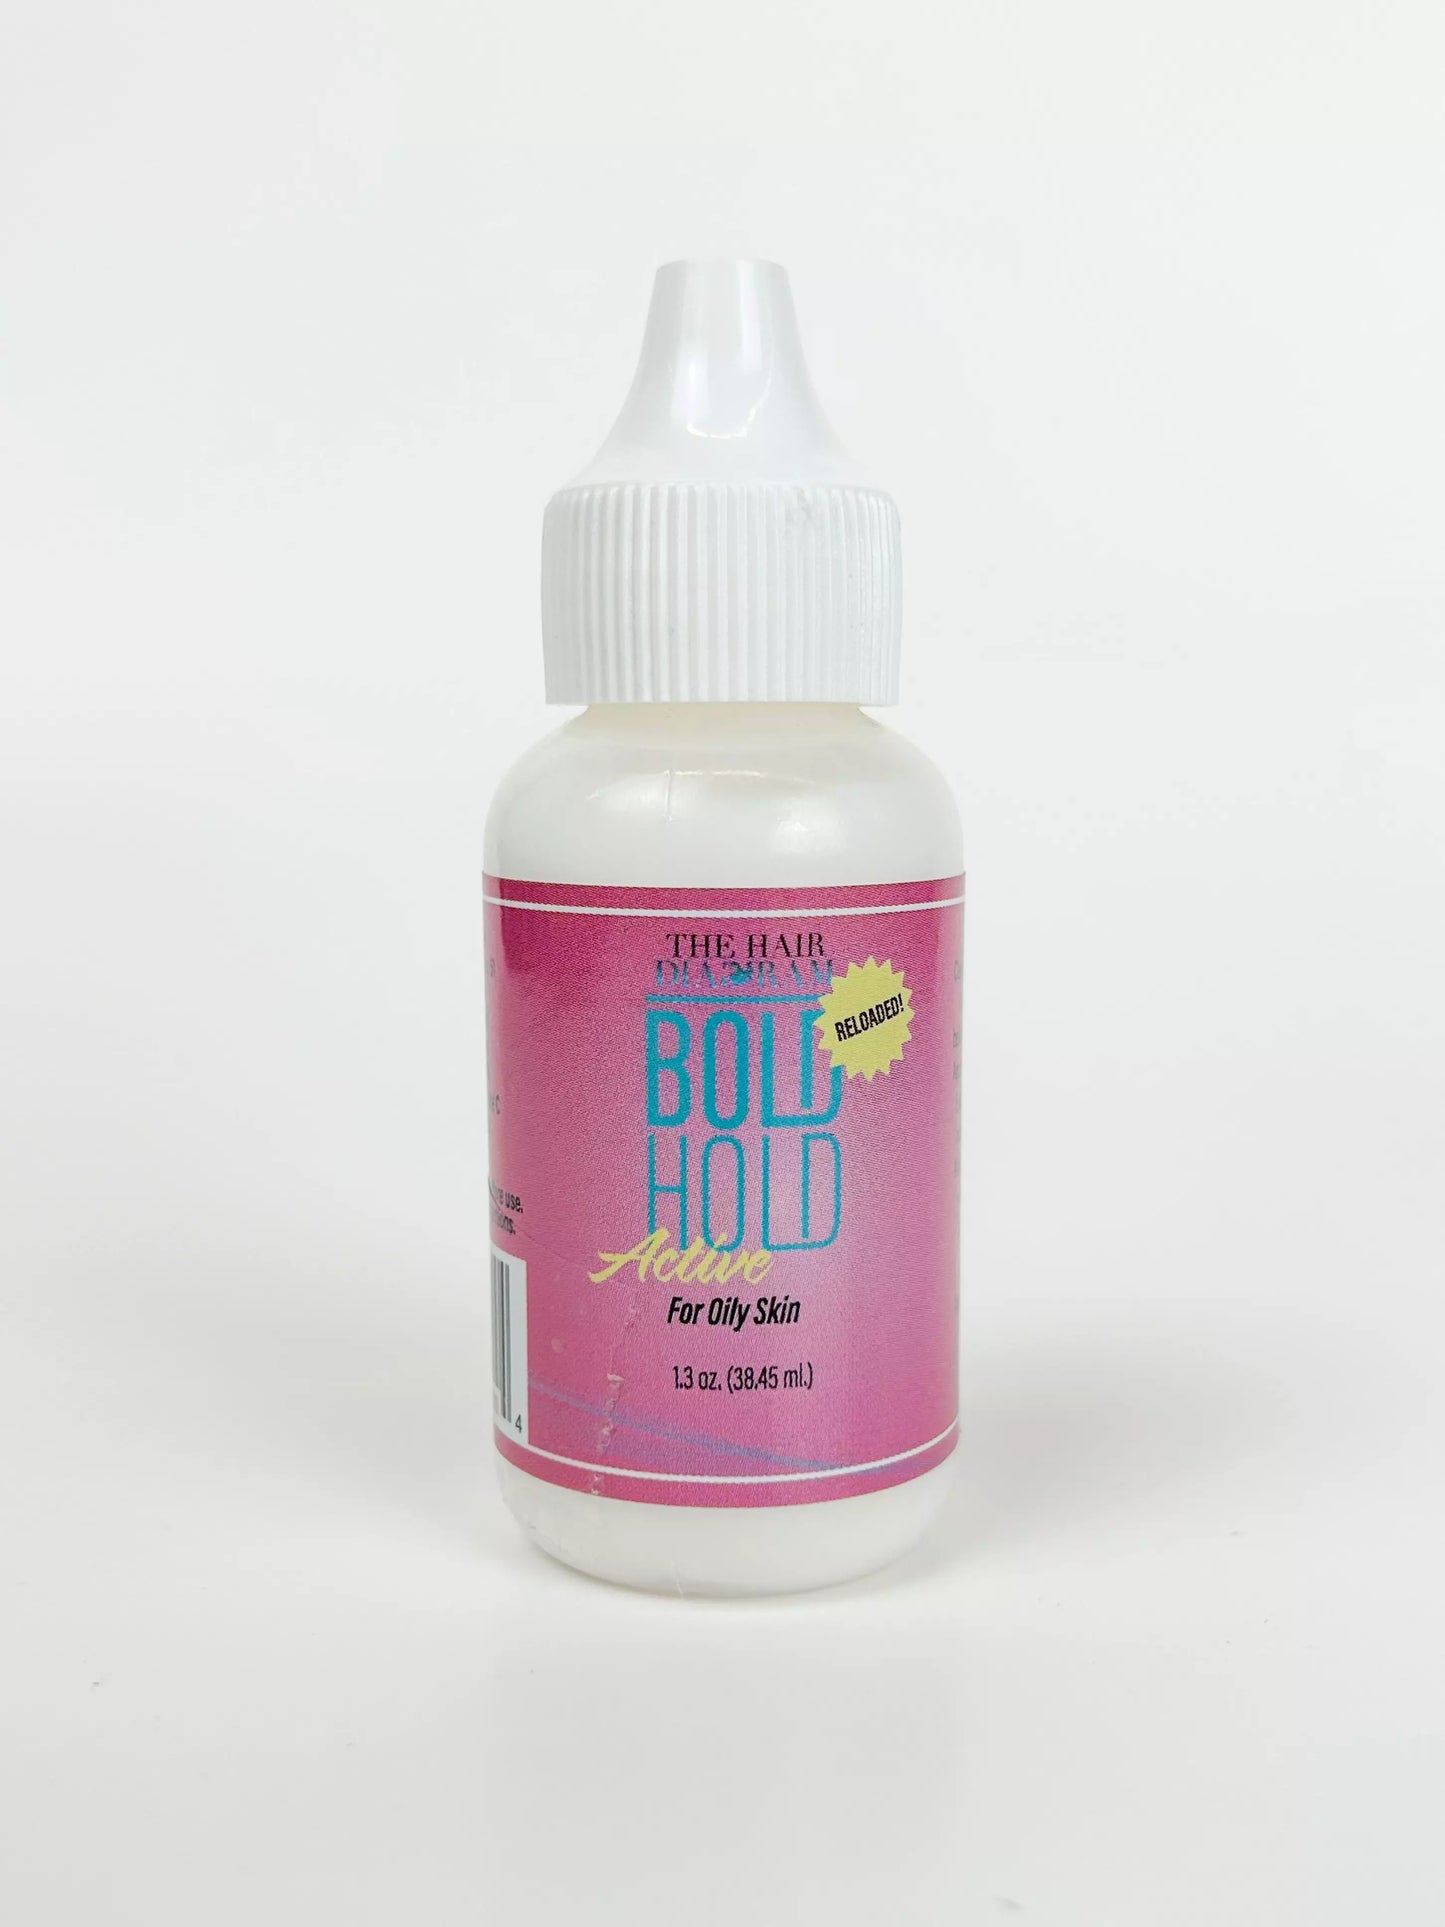 Bold Hold Active Reloaded Wig Glue Adhesive